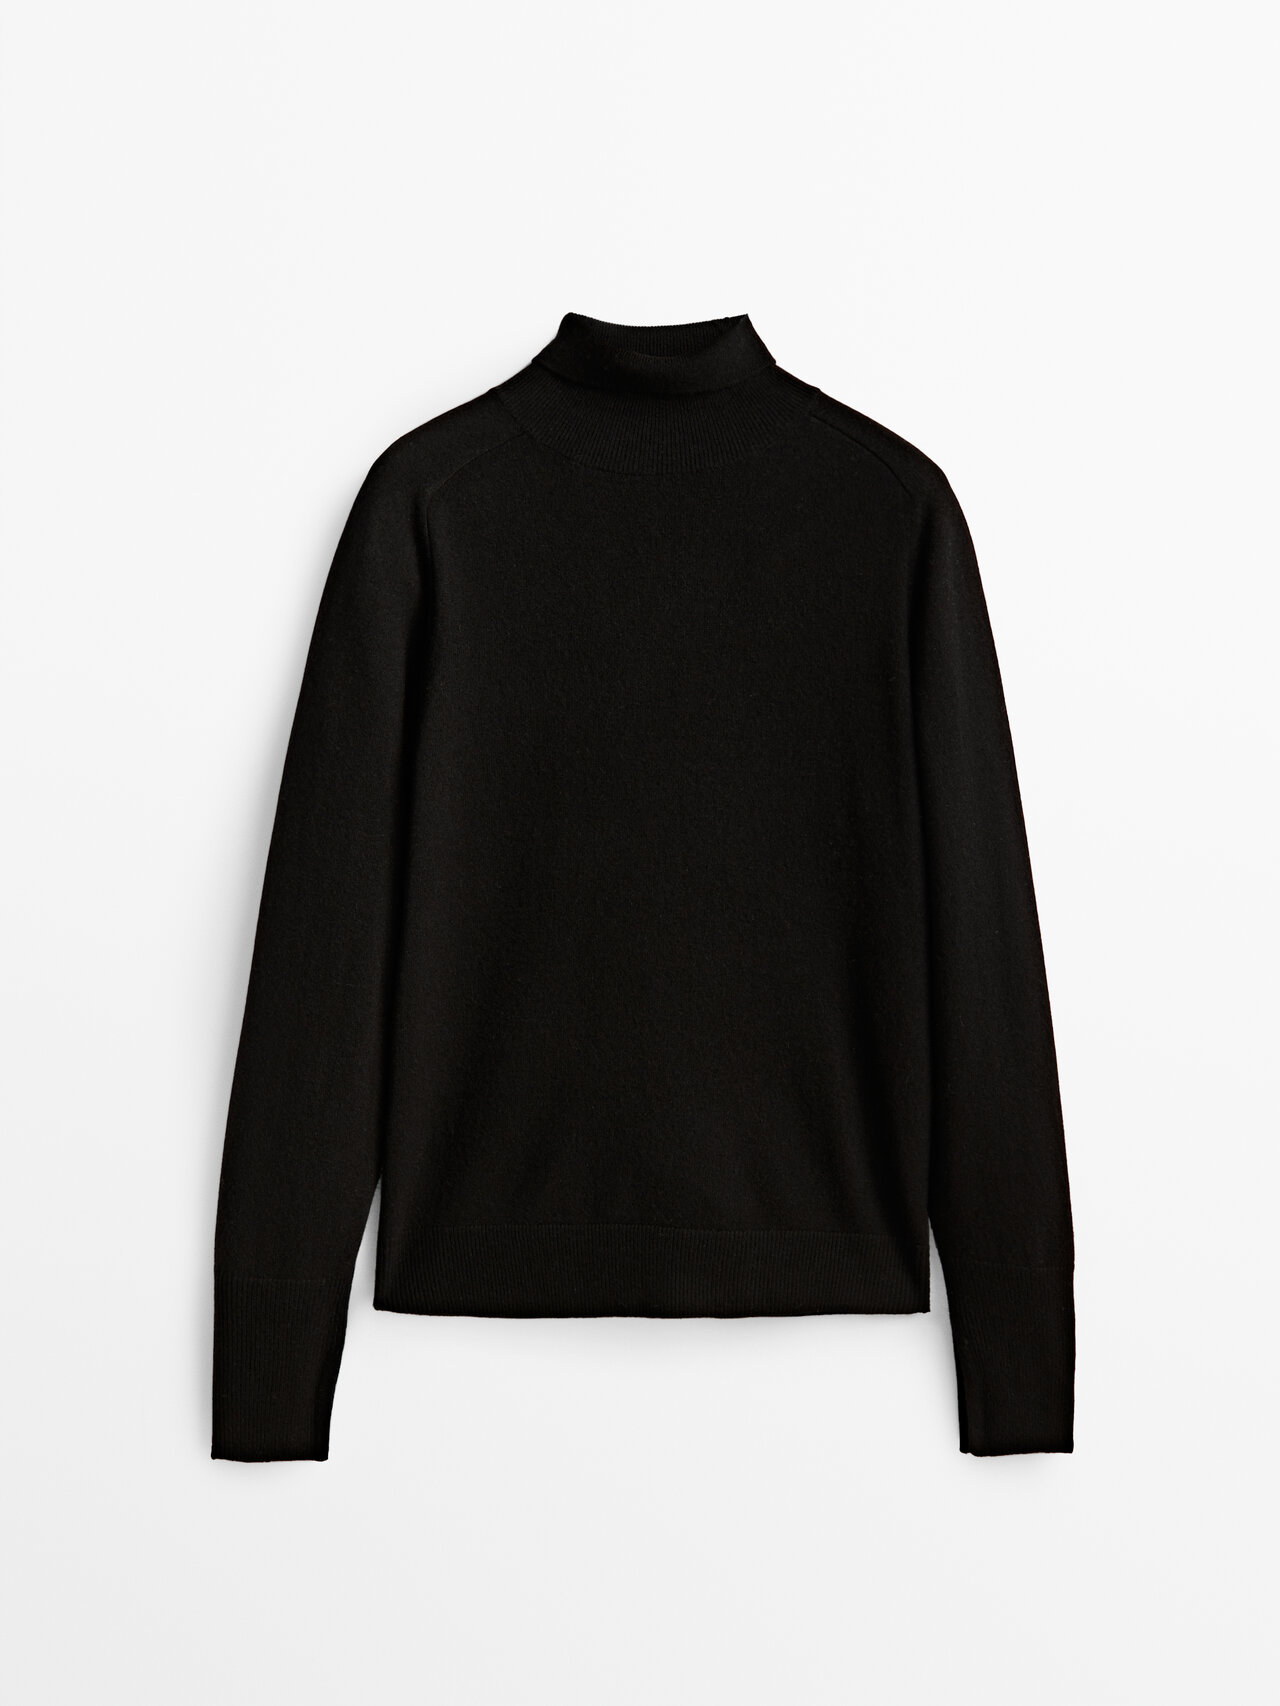 Massimo Dutti Wool And Cashmere High Neck Sweater In Black